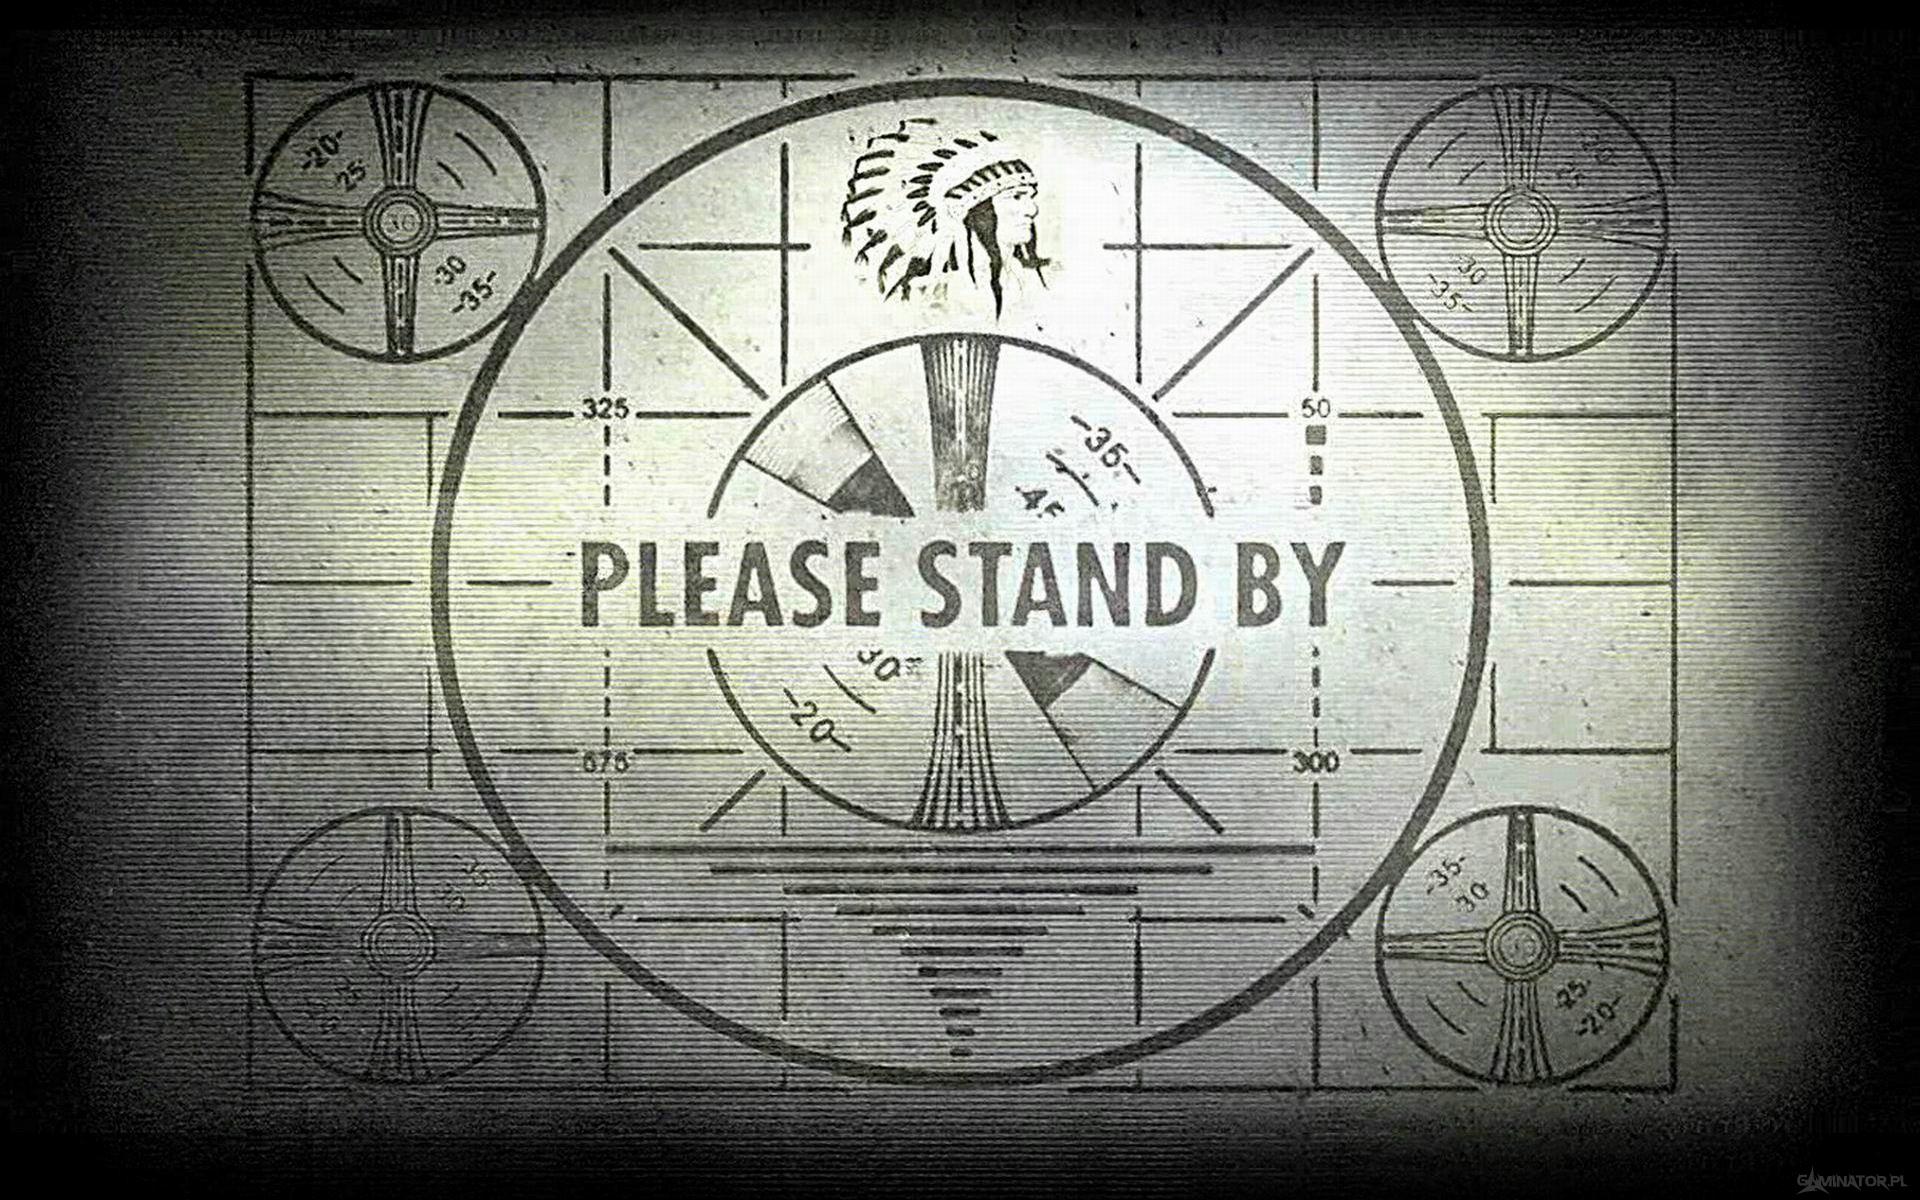 Logging IP address... Please stand by...